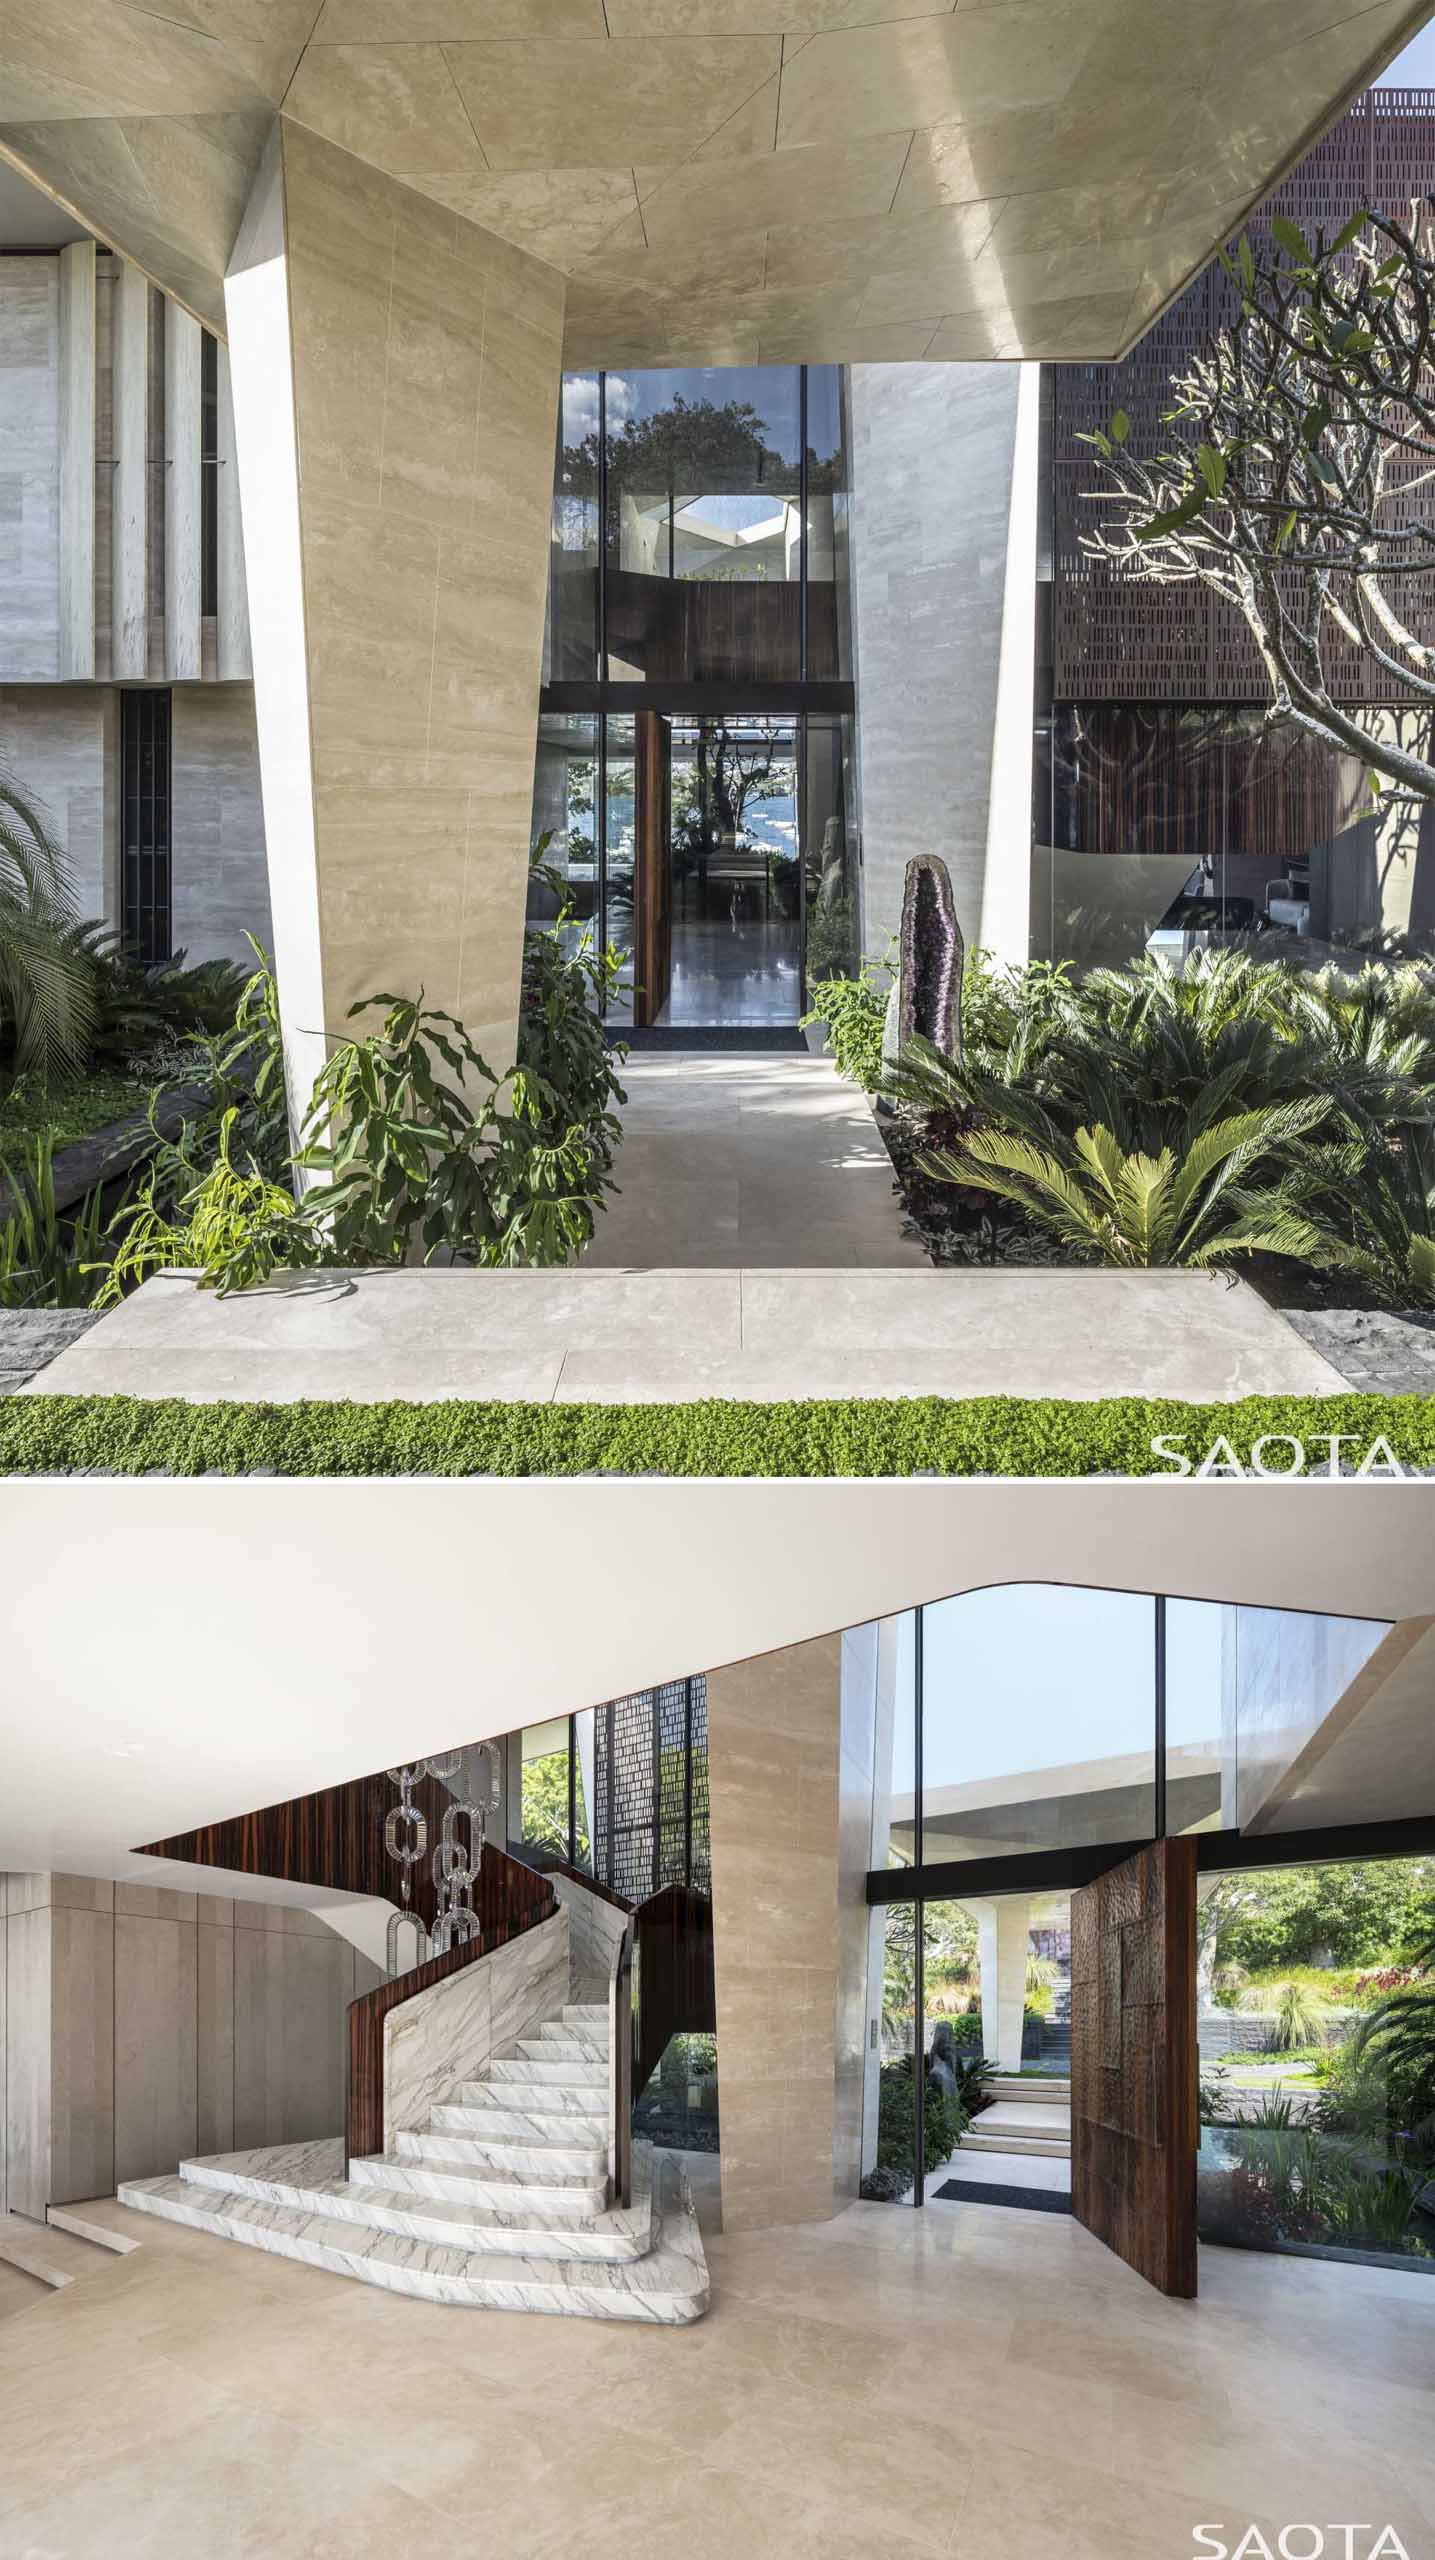 The ،use has a sculpted stone form that leads to the front door and foyer. From the foyer, views of the water and a tree are visible.